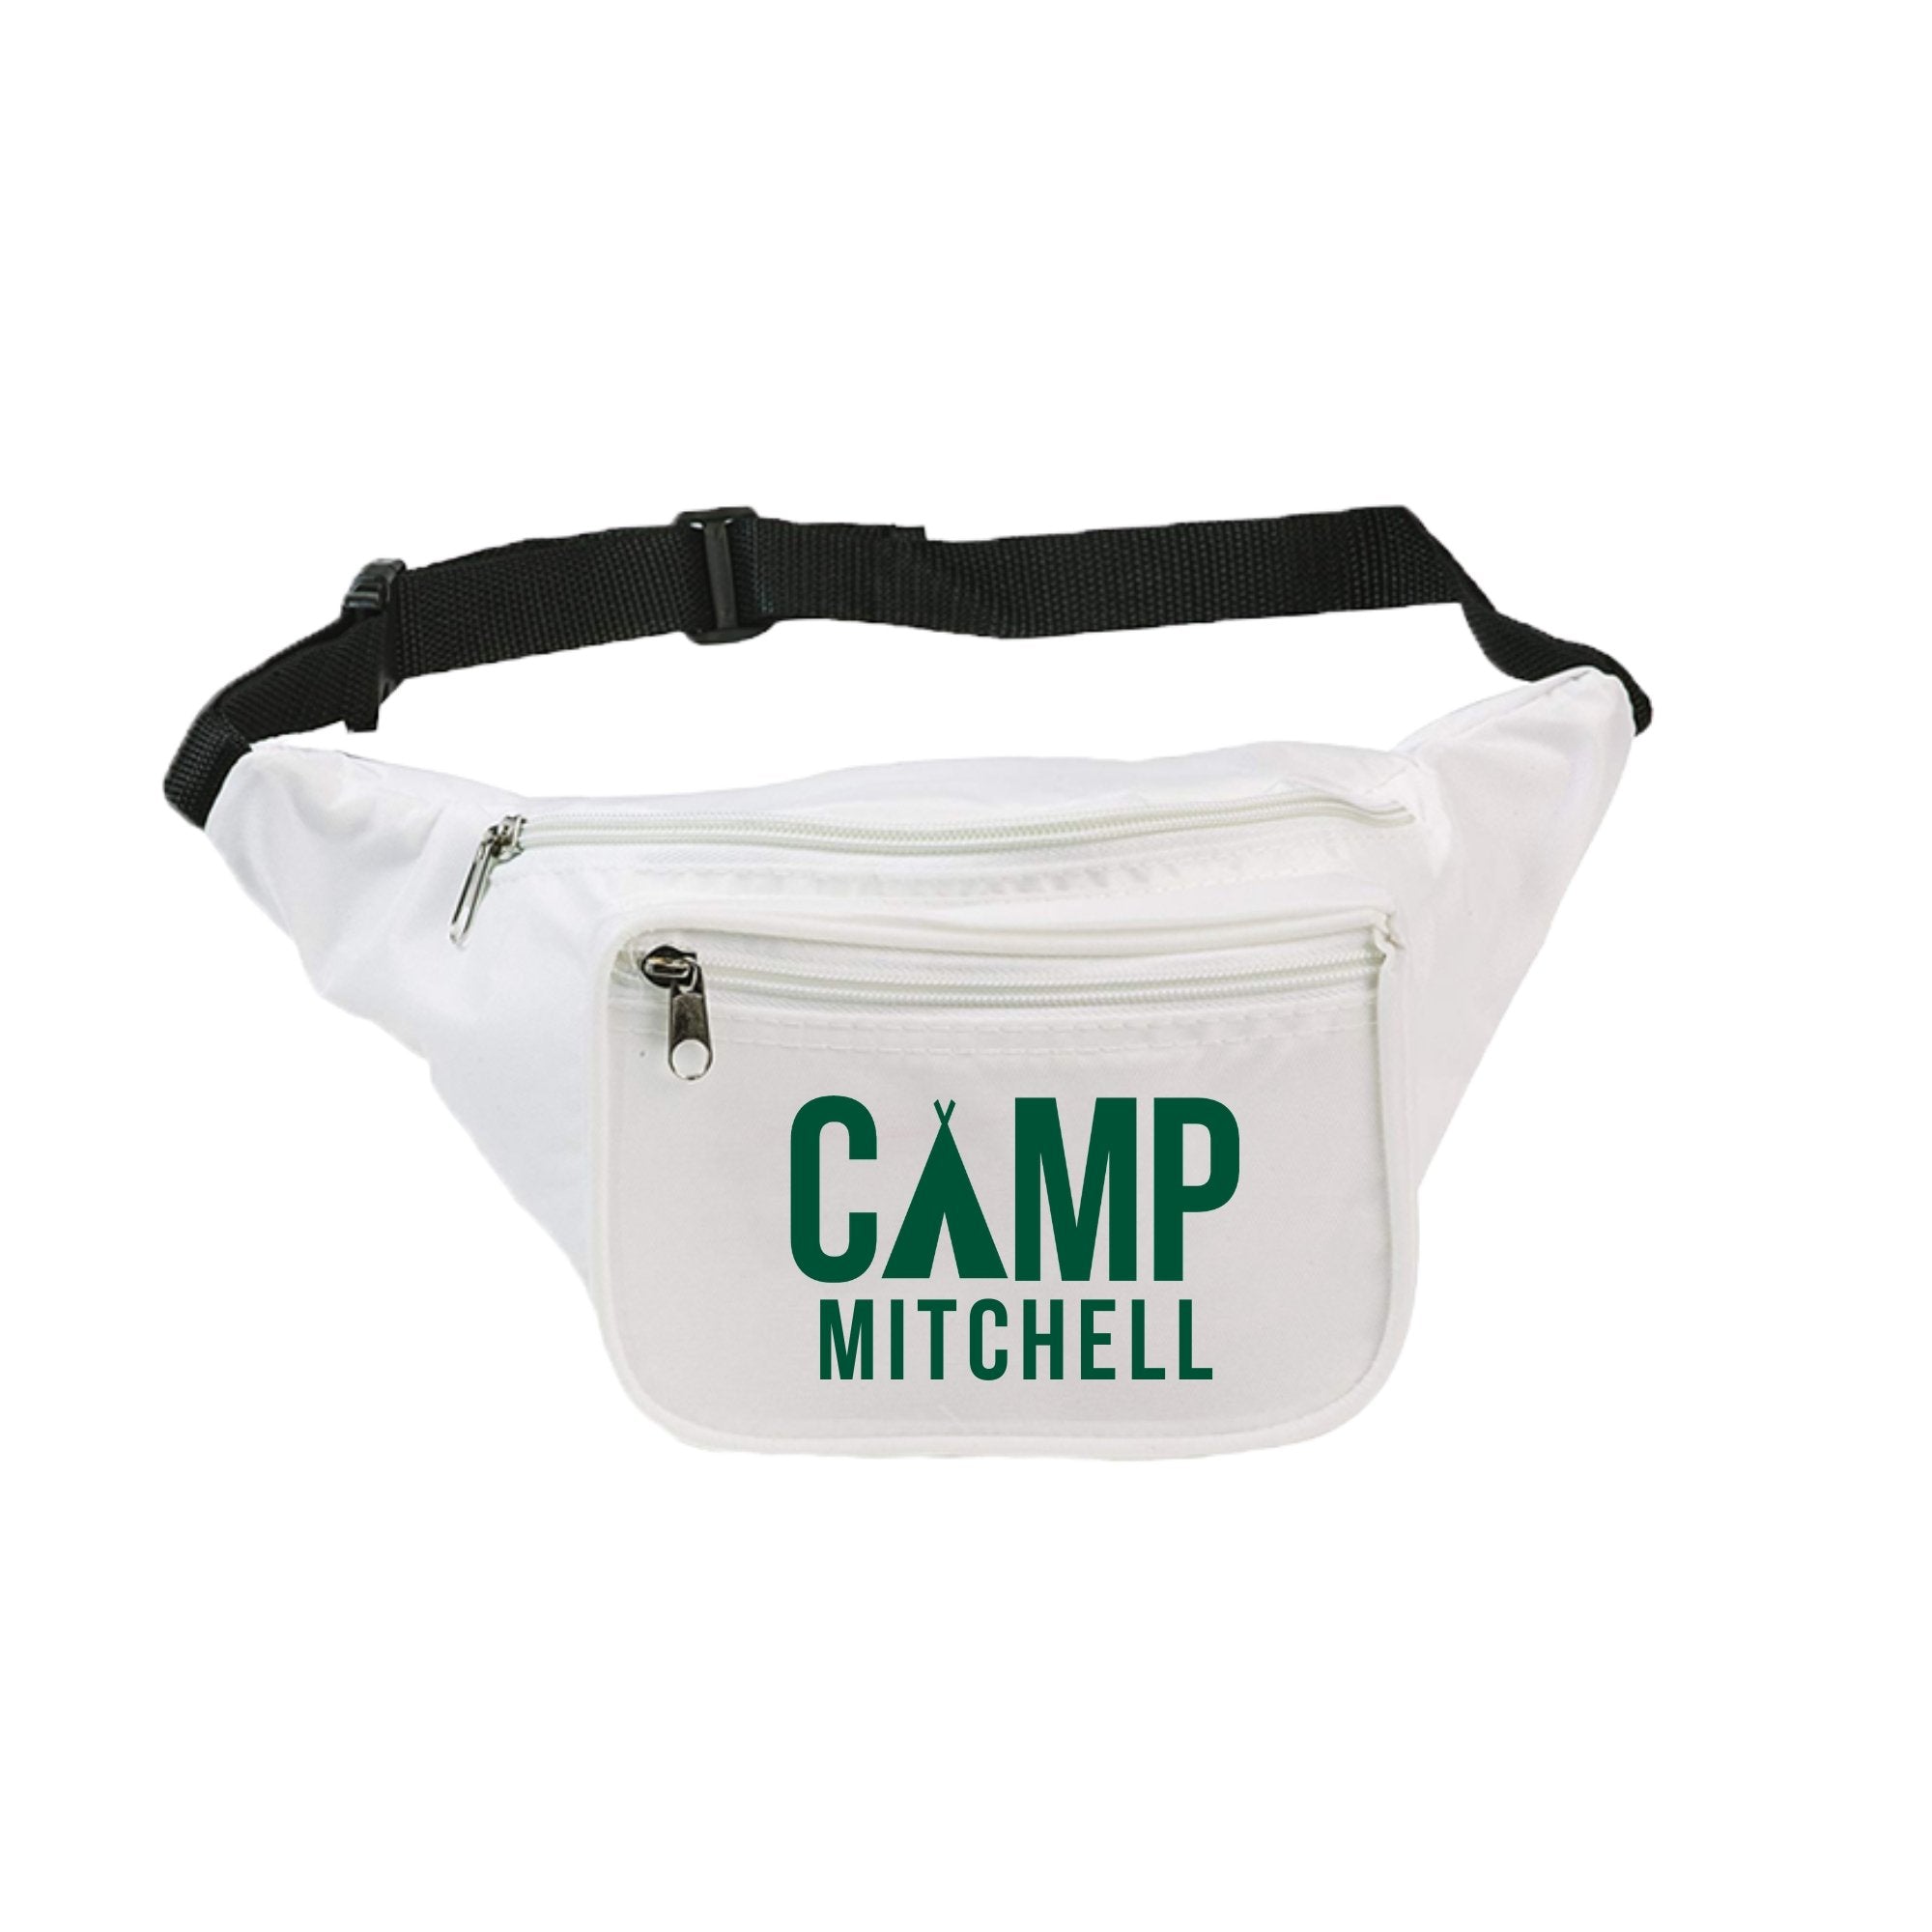 A white fanny pack reads "Camp Mitchell" with a tent icon on the front pocket